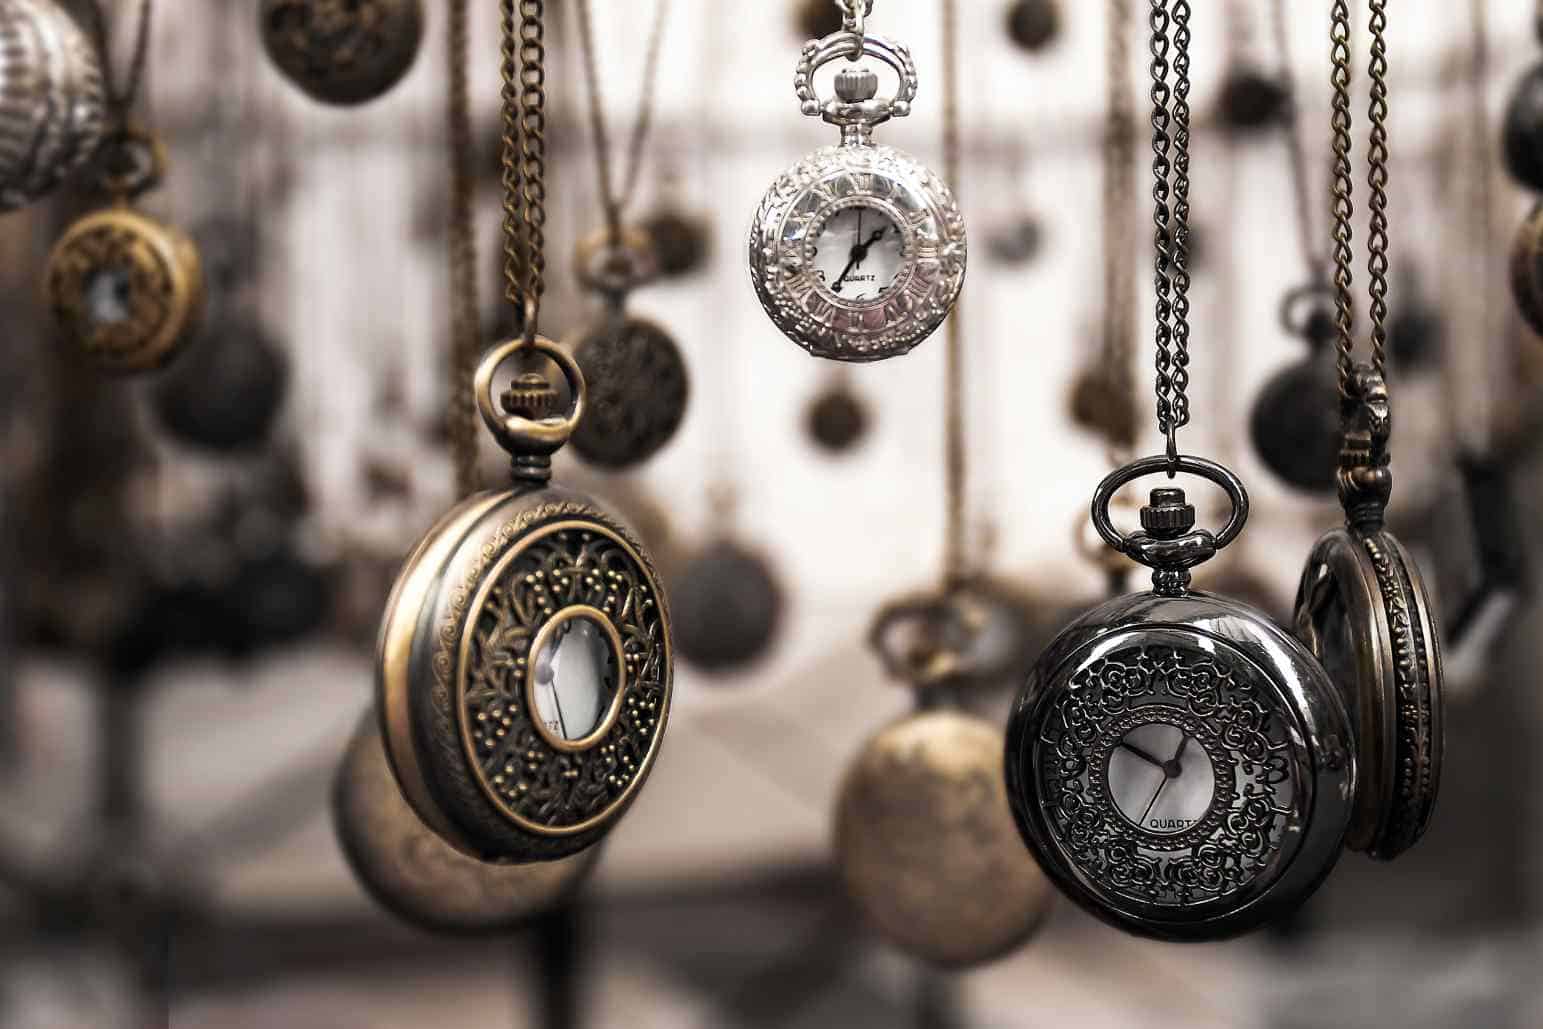 mage depicting antique pocket watch collection